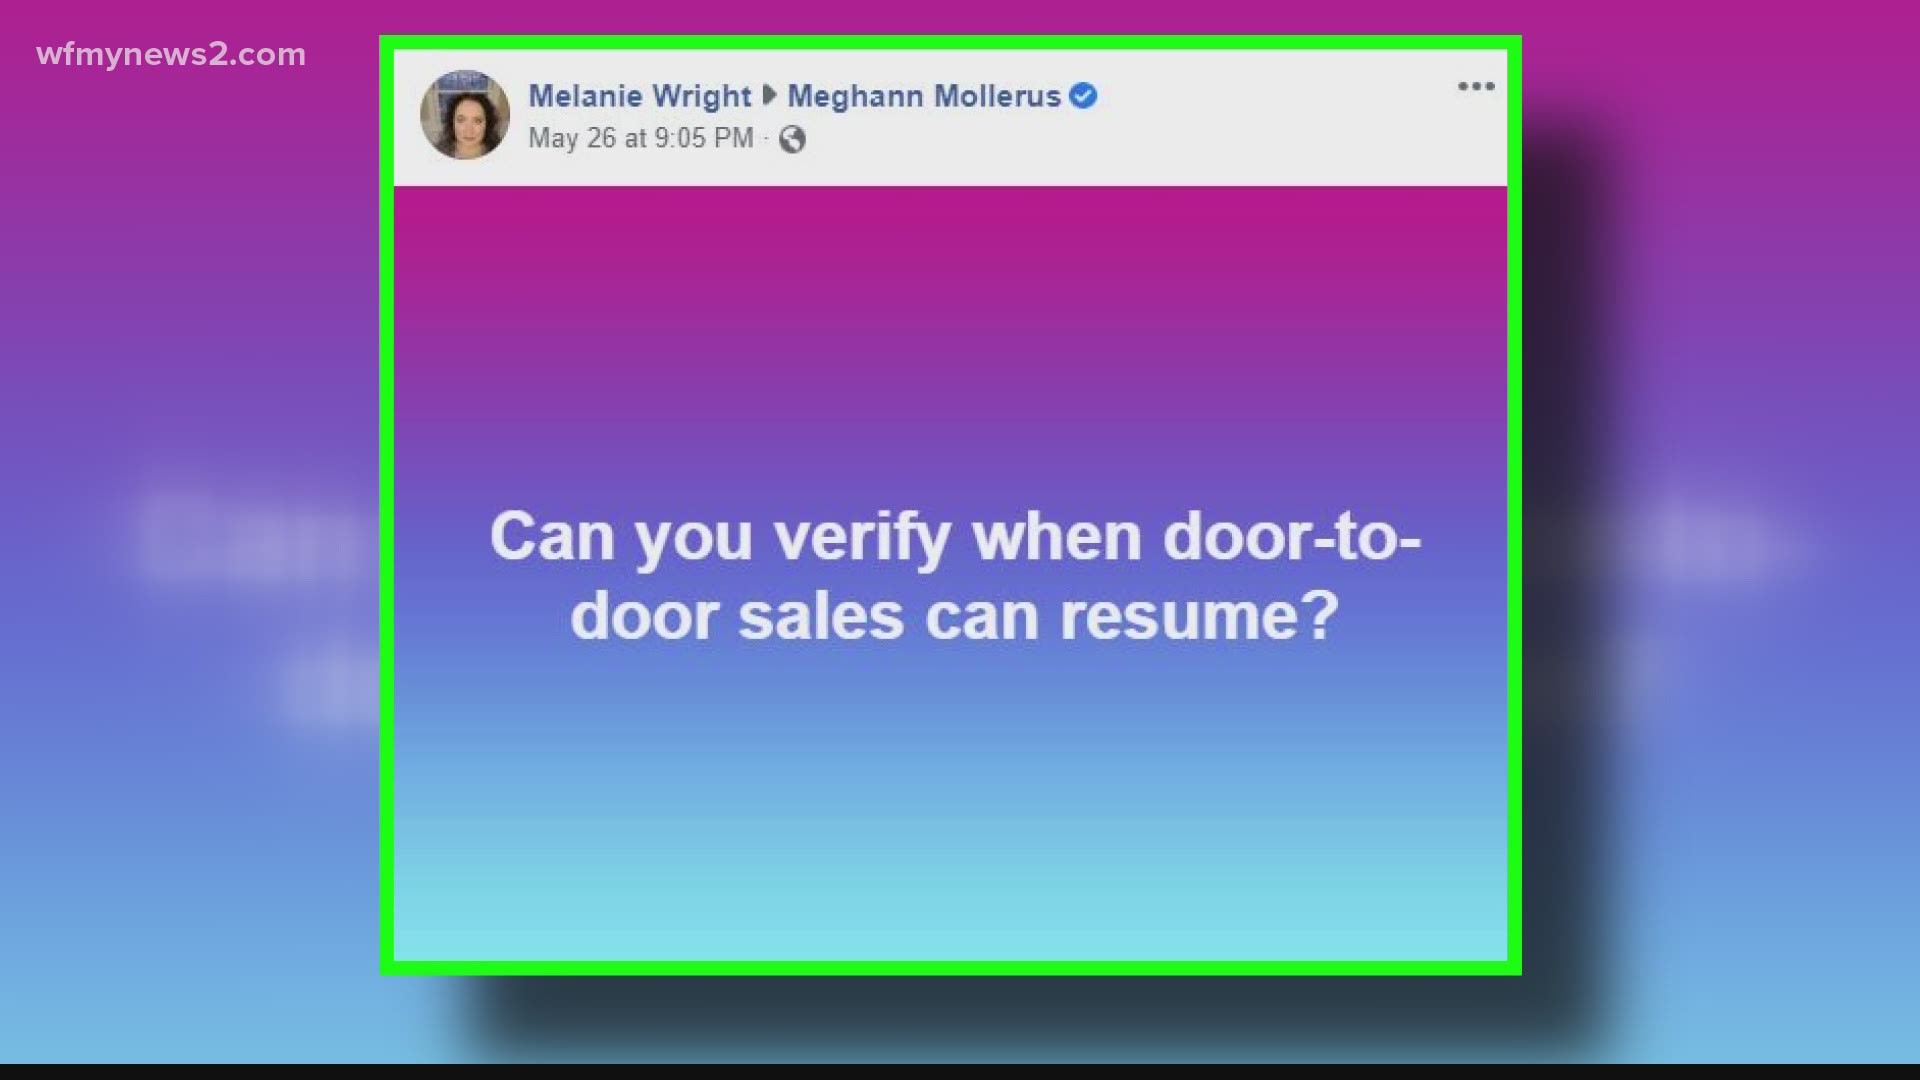 We asked the state attorney general if the sales person at your door has to have an i.d. on them. He said it would be good practice but it's not required.